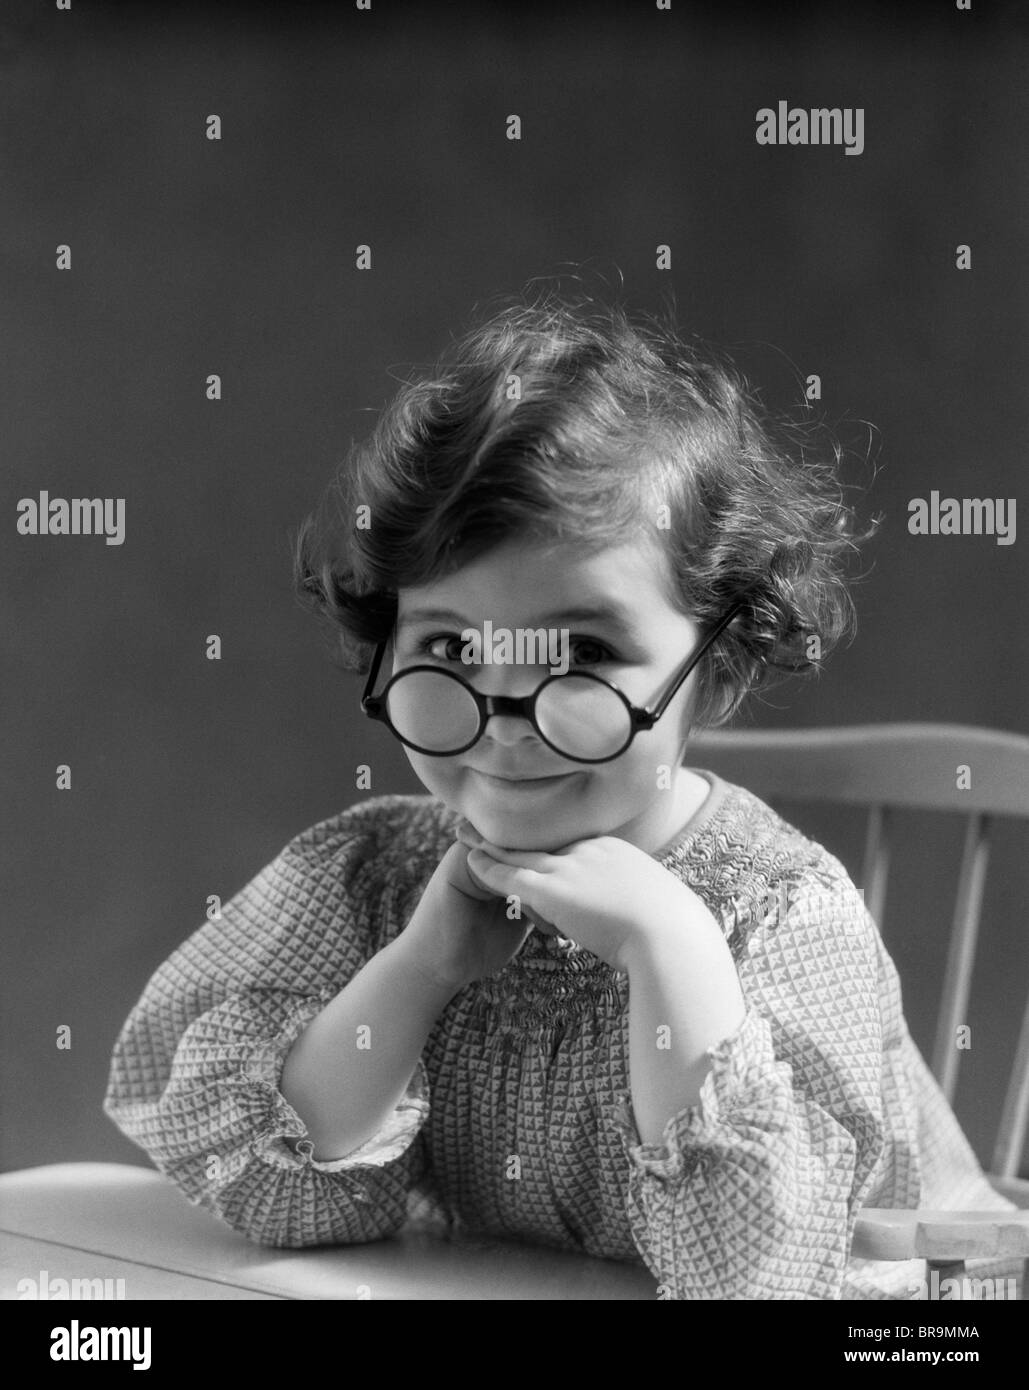 1930s PORTRAIT LITTLE GIRL SMILING WEARING BIG ROUND EYEGLASSES LOOKING AT CAMERA Stock Photo